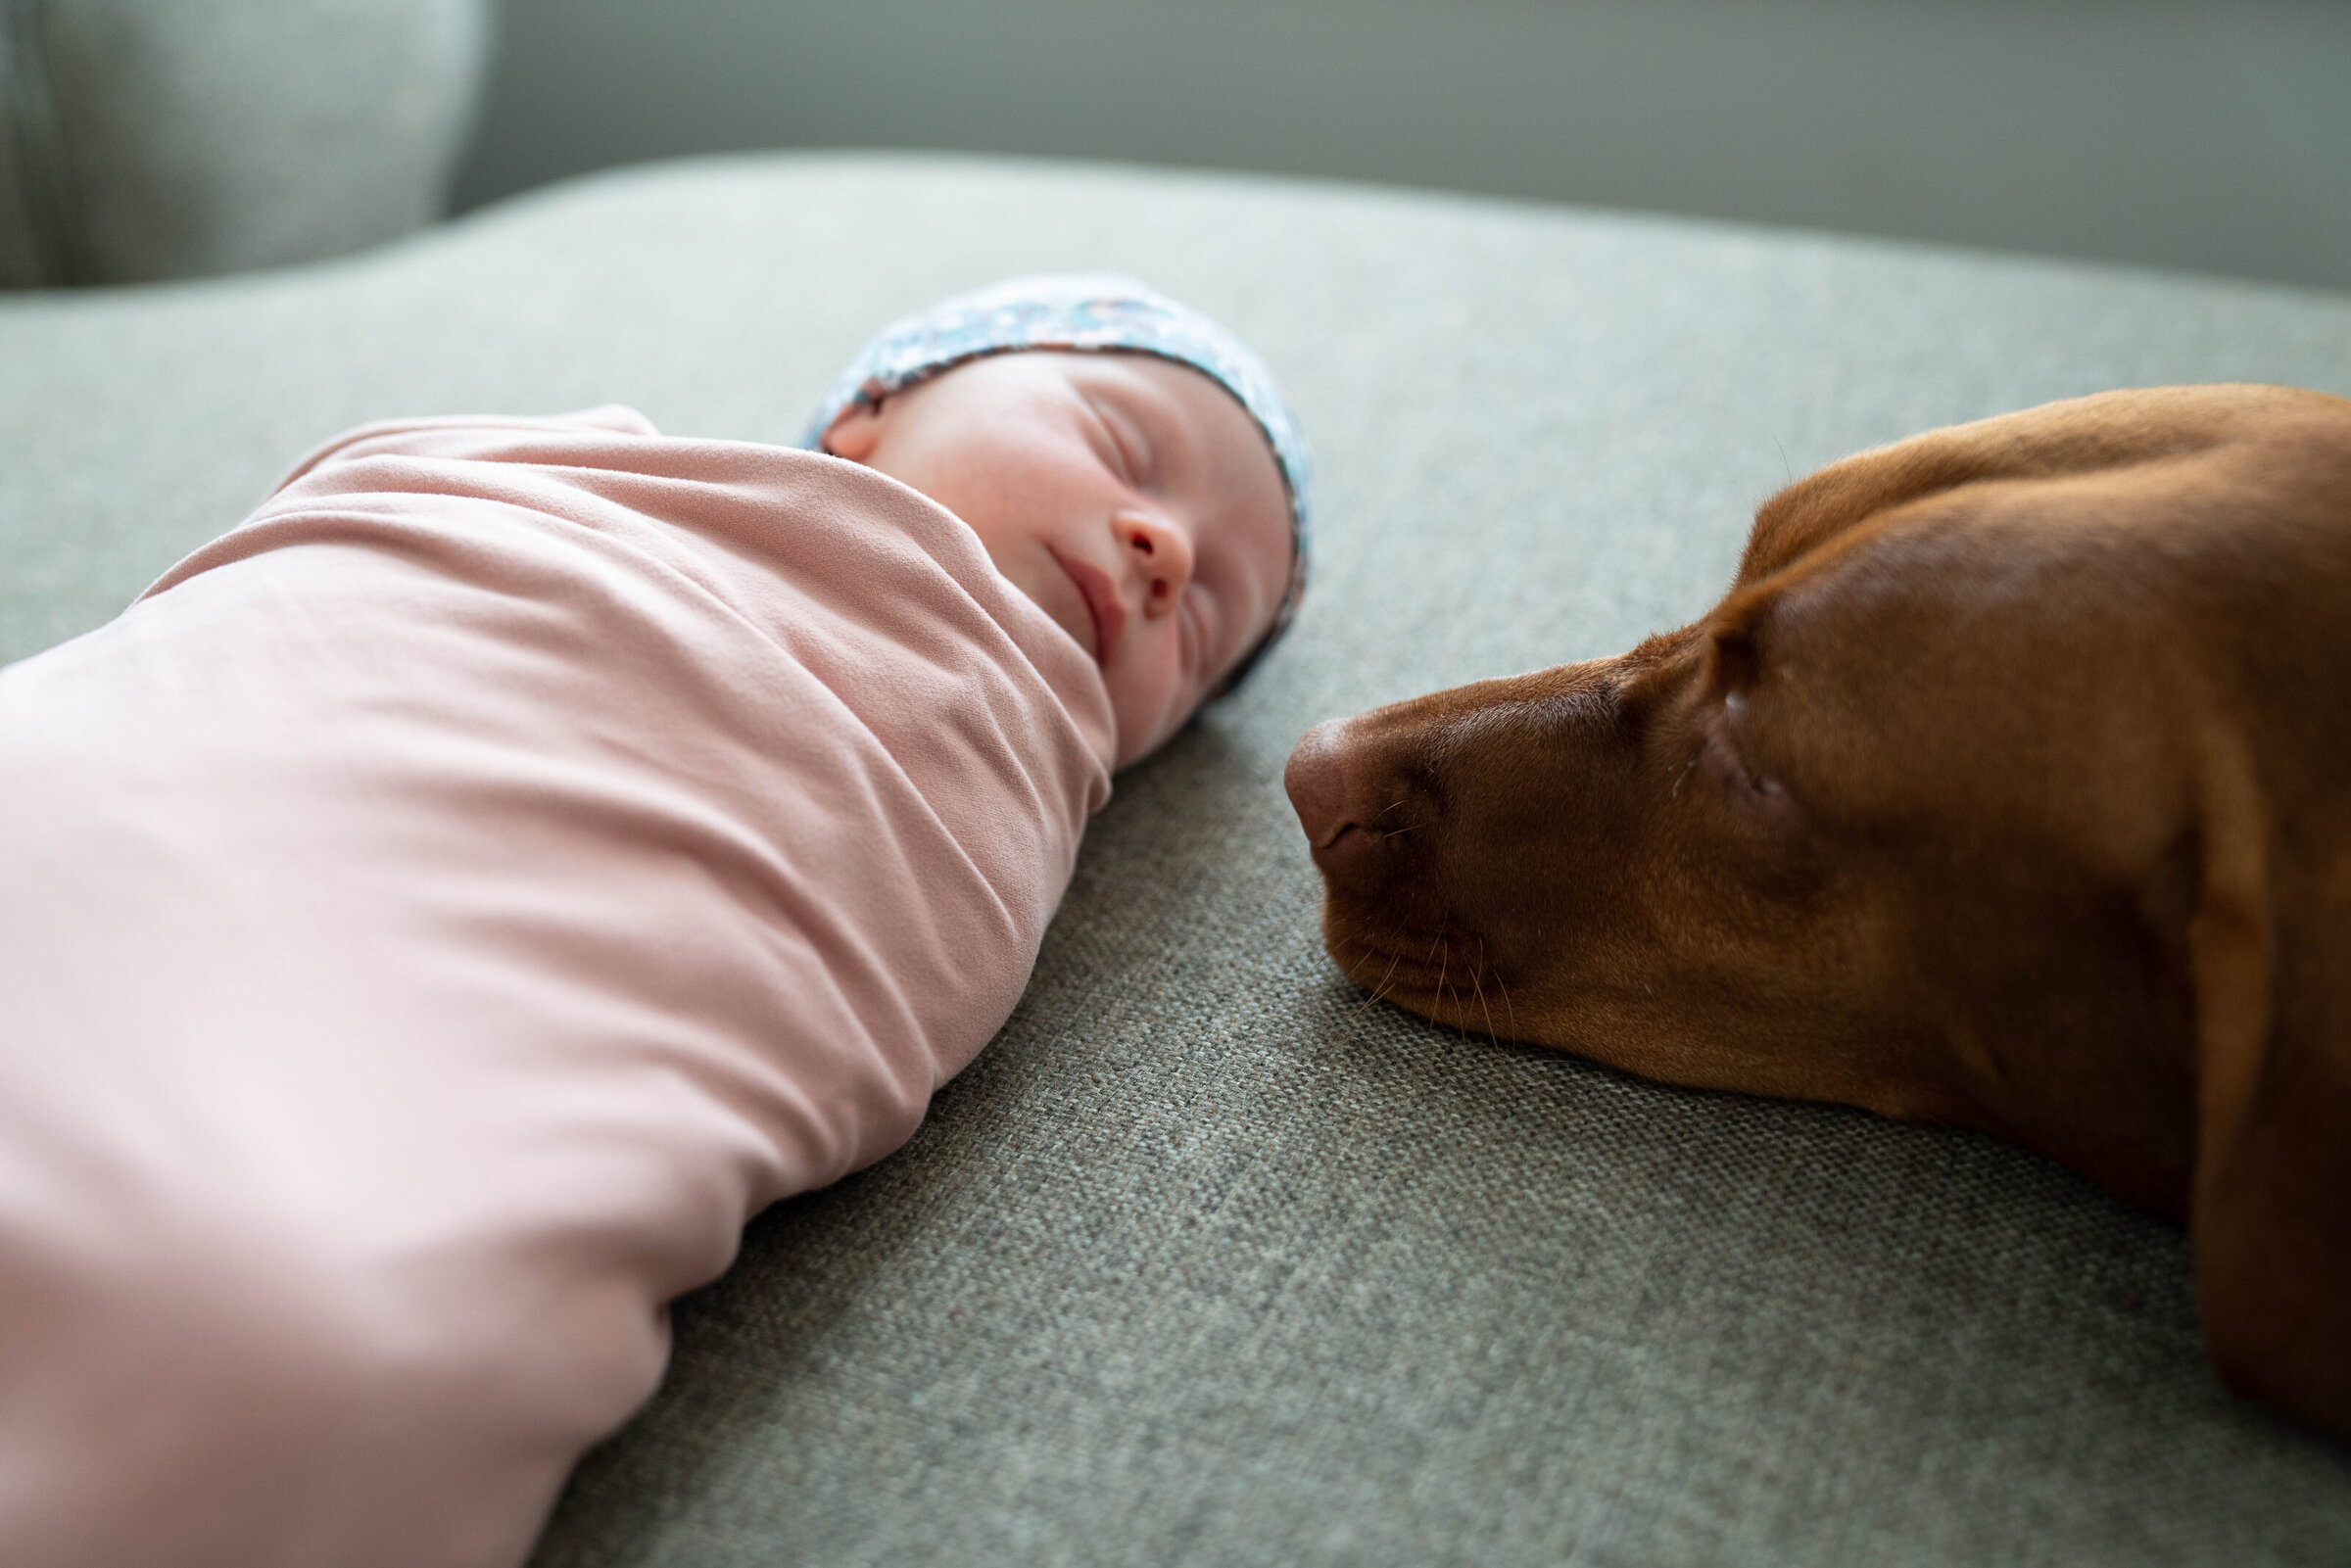 Newborn sleeping on the couch while the dog checks in on her